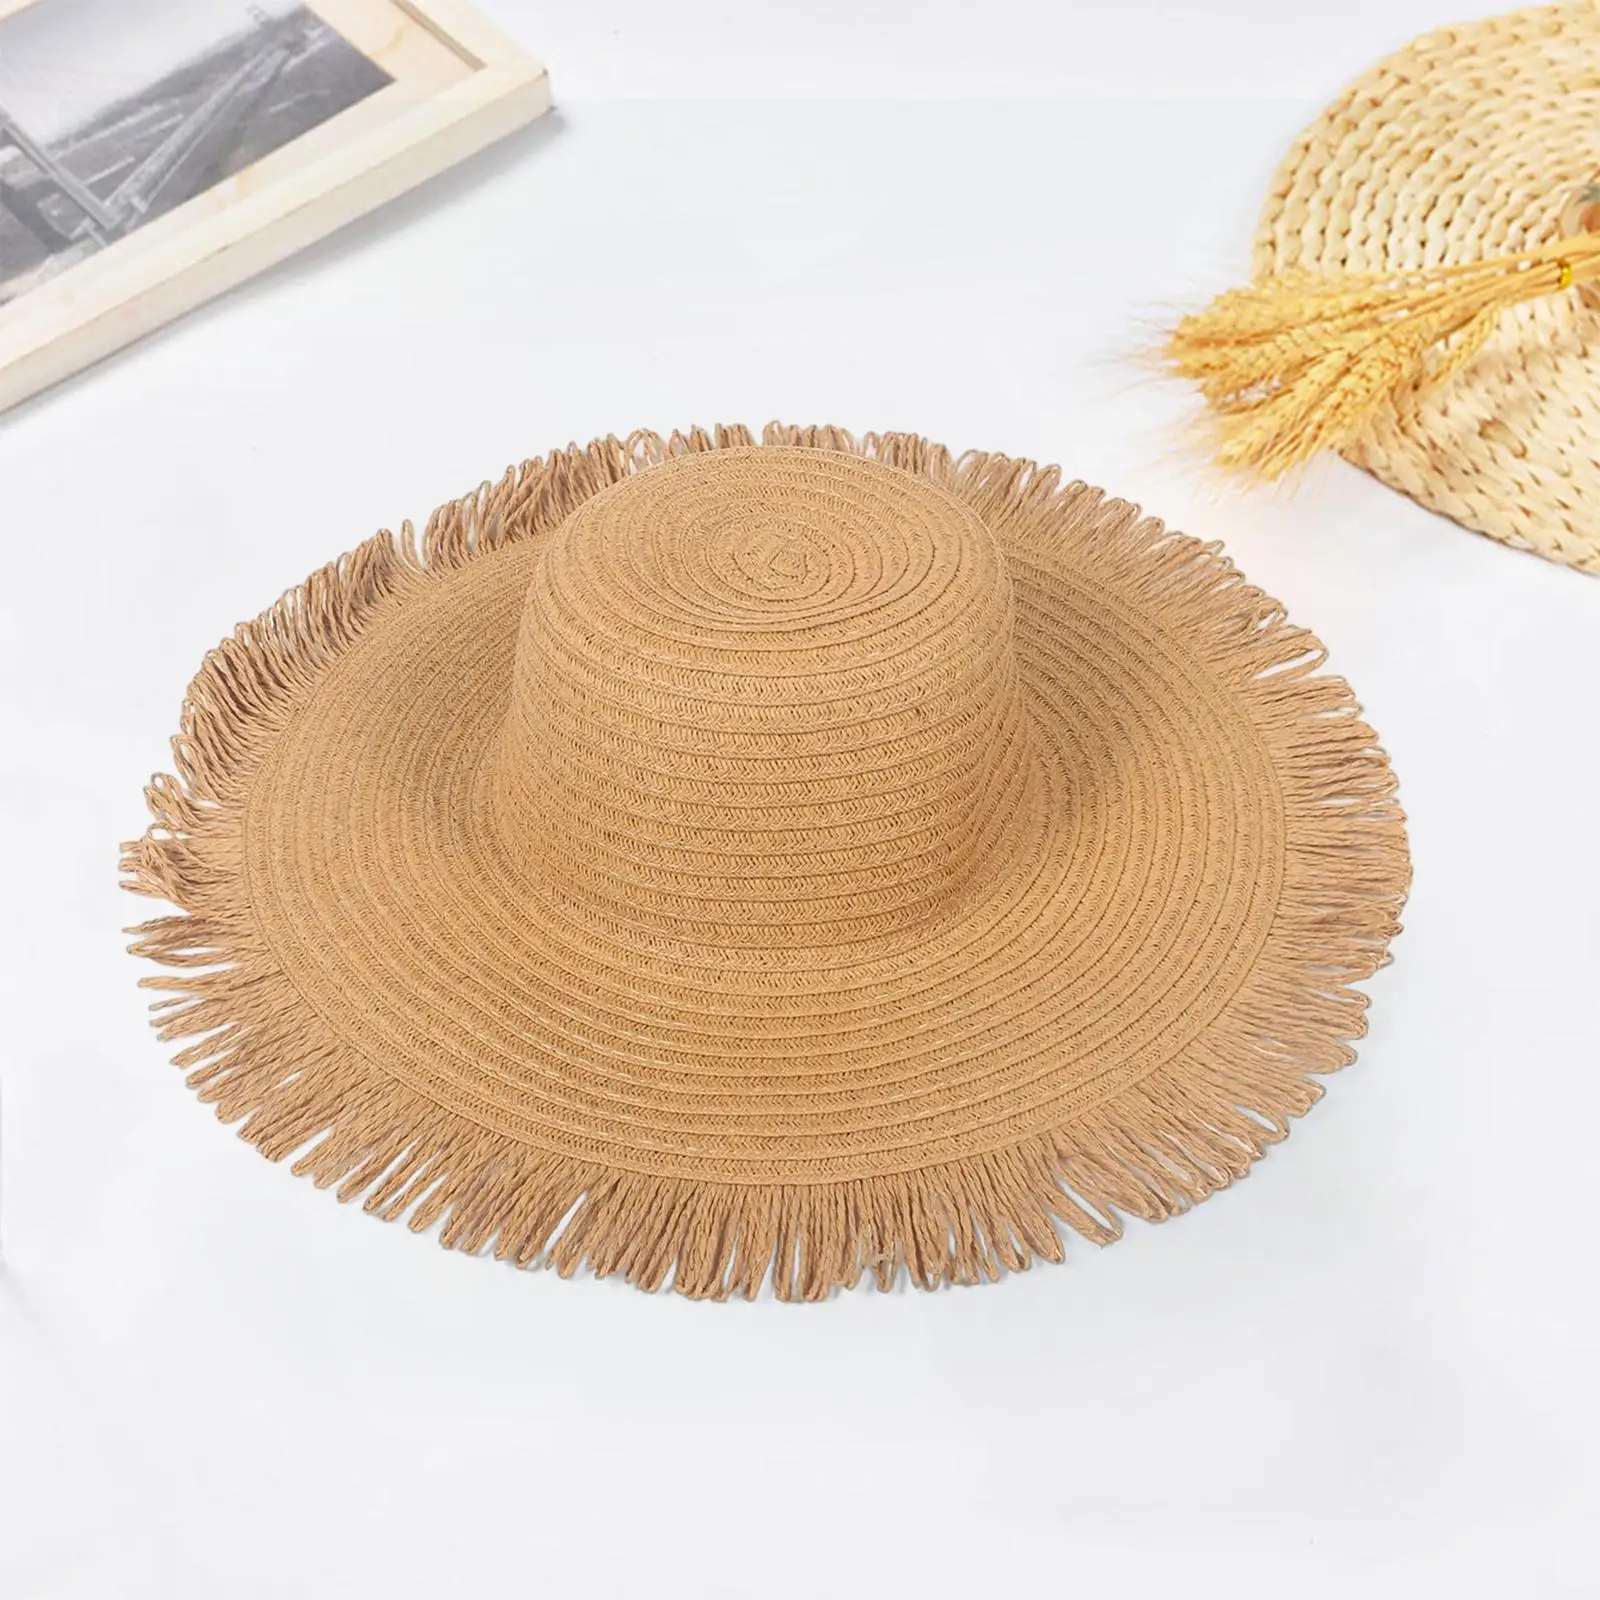 Straw Sun Hat Tassels  Protective Large Sunhat  for Party